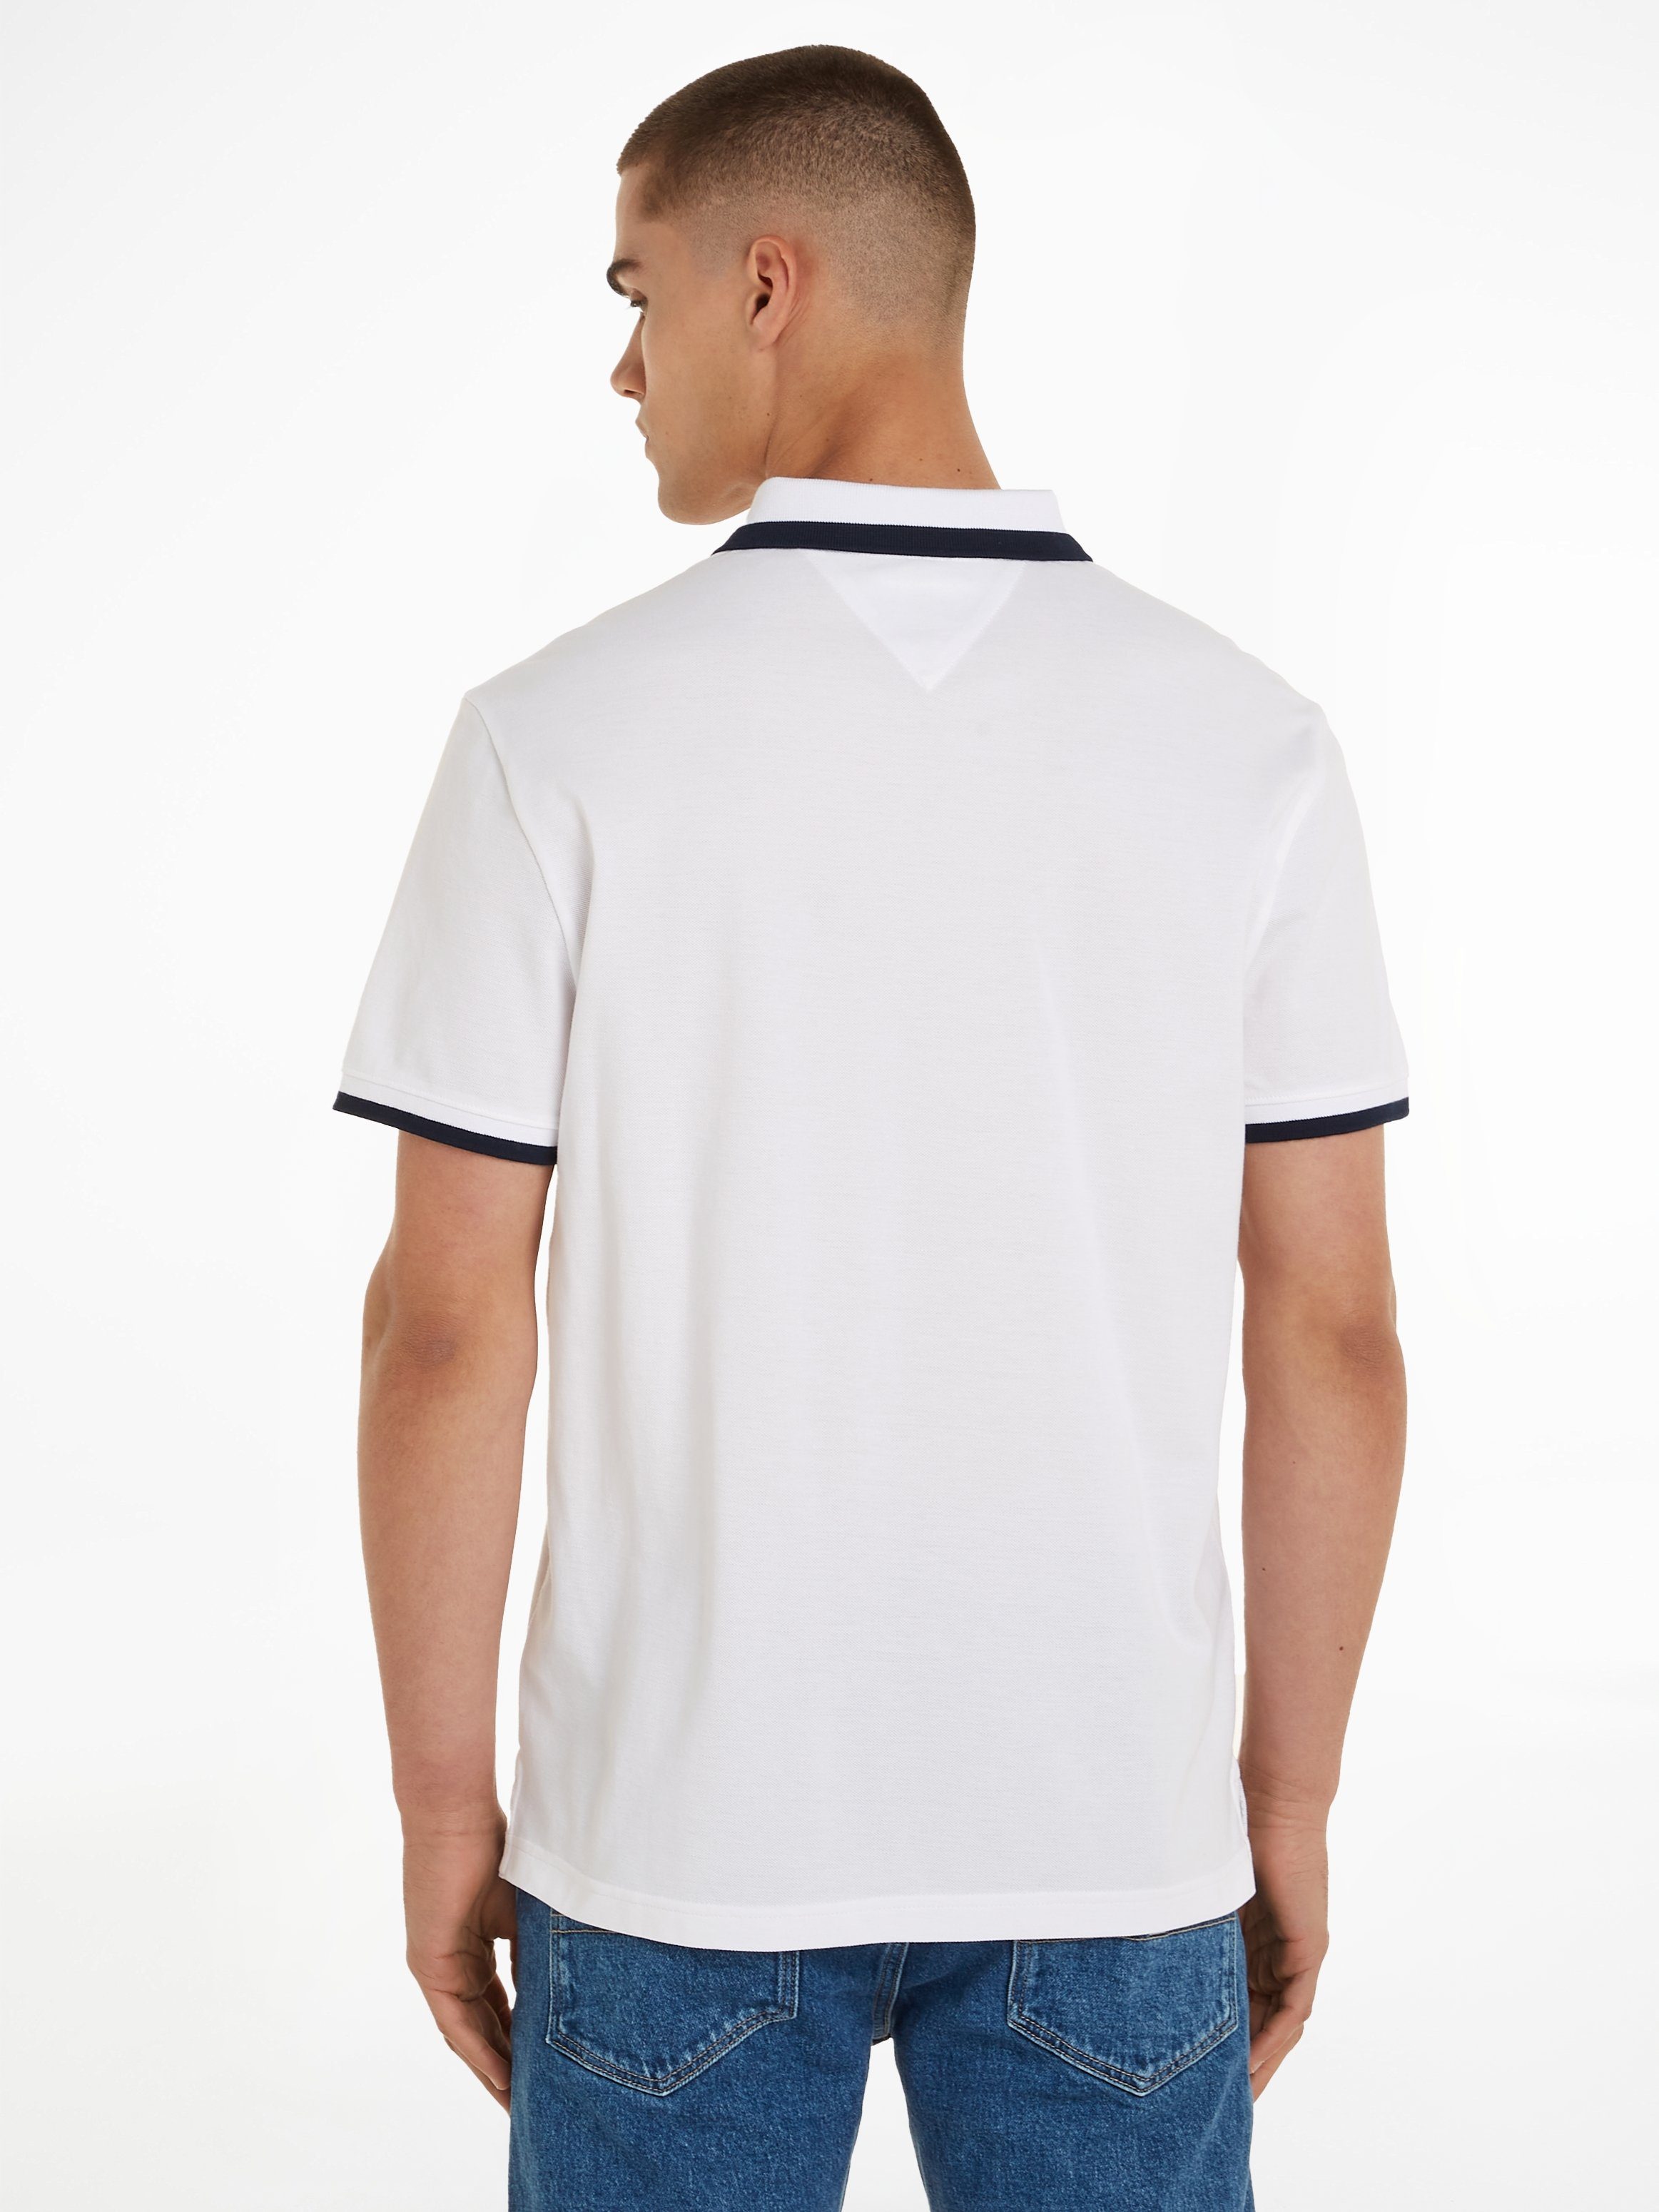 Jeans mit POLO TJM Poloshirt TIPPED White Tommy Polokragen SOLID REG